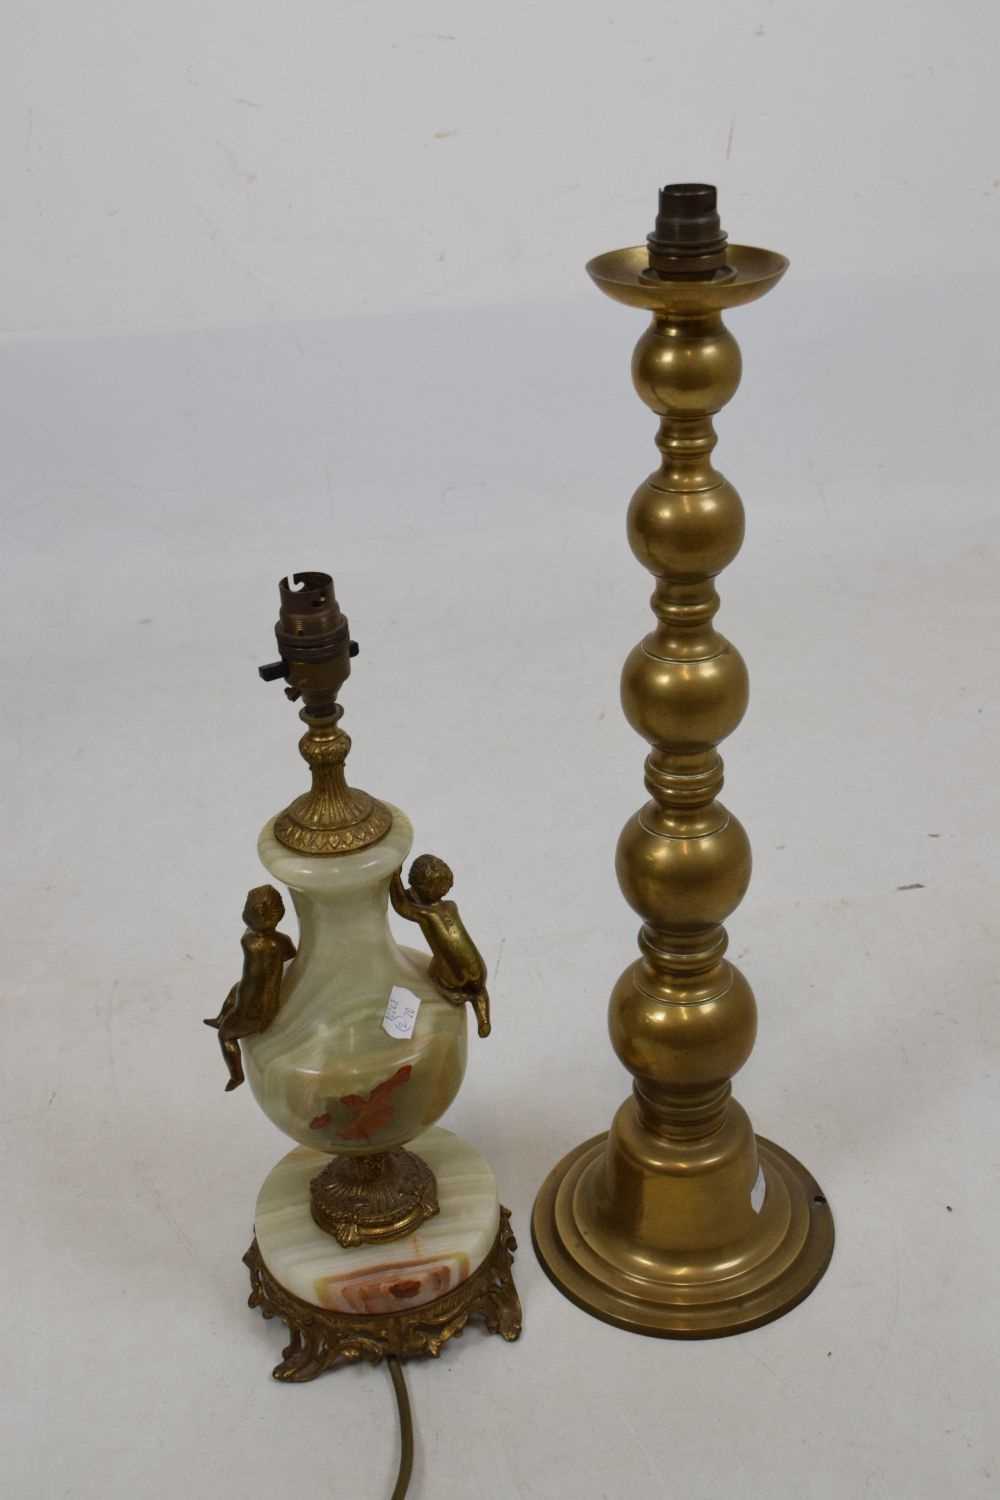 1970s gilt metal mounted onyx table lamp and brass lamp - Image 4 of 8